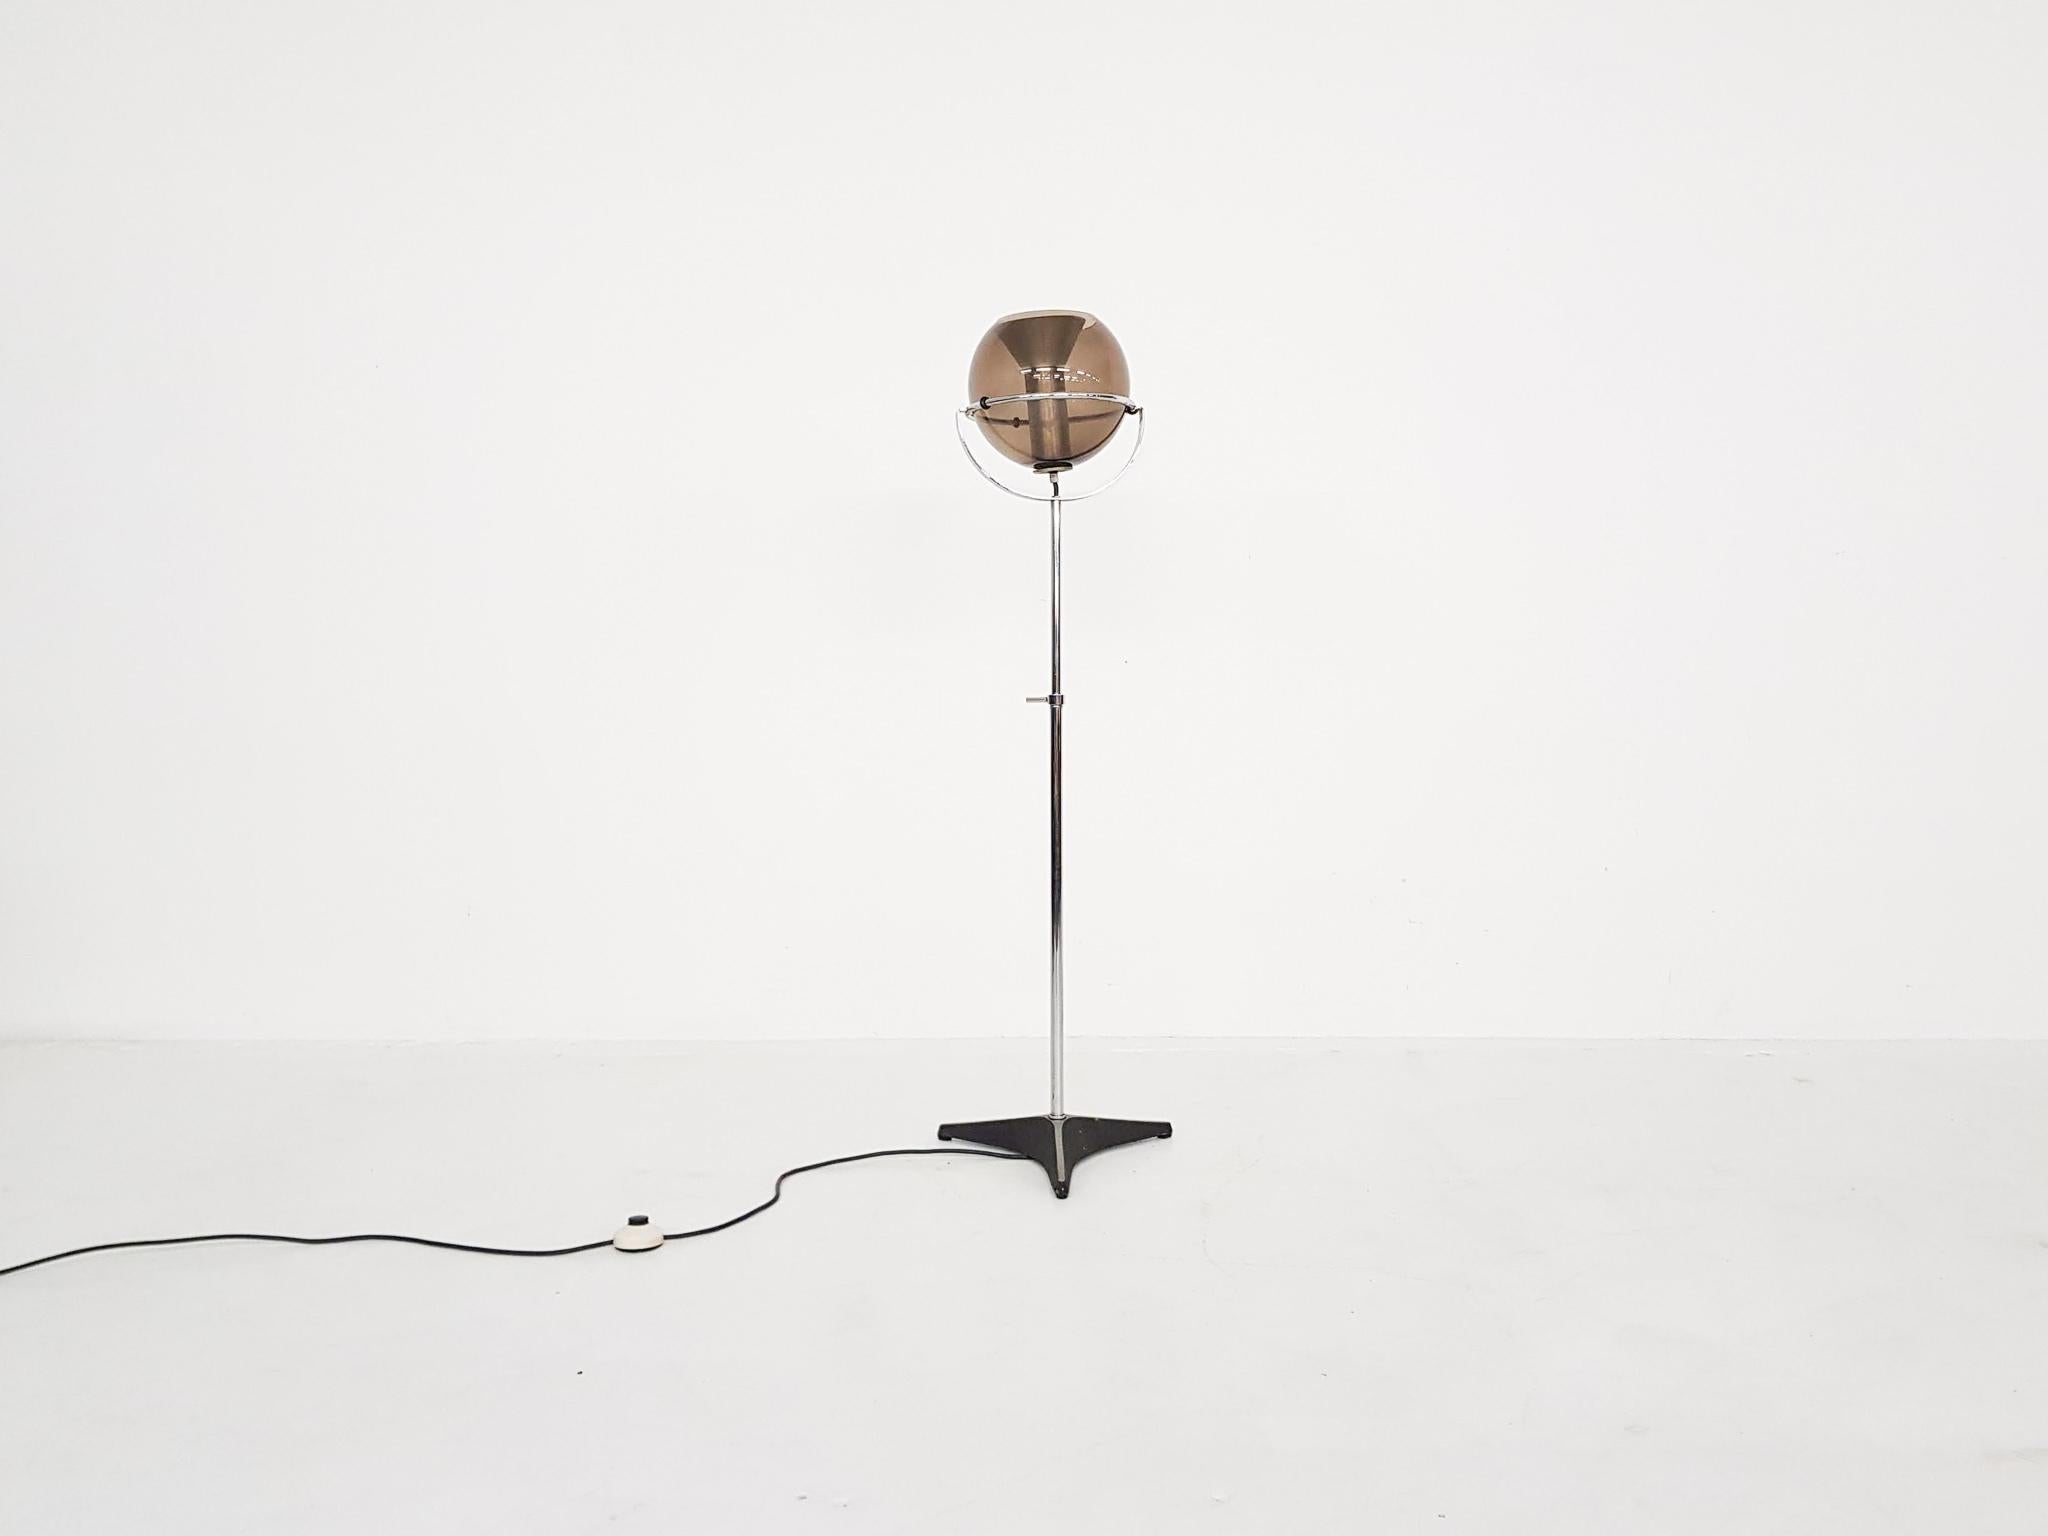 Beautiful floor lamp from RAAK. The floor lamp features a glass globe on a metal stand. Because the globe rests in the Stand, it can positioned in various angles. The metal stem is adjustable in height.
RAAK was a Dutch lighting manufacturer from